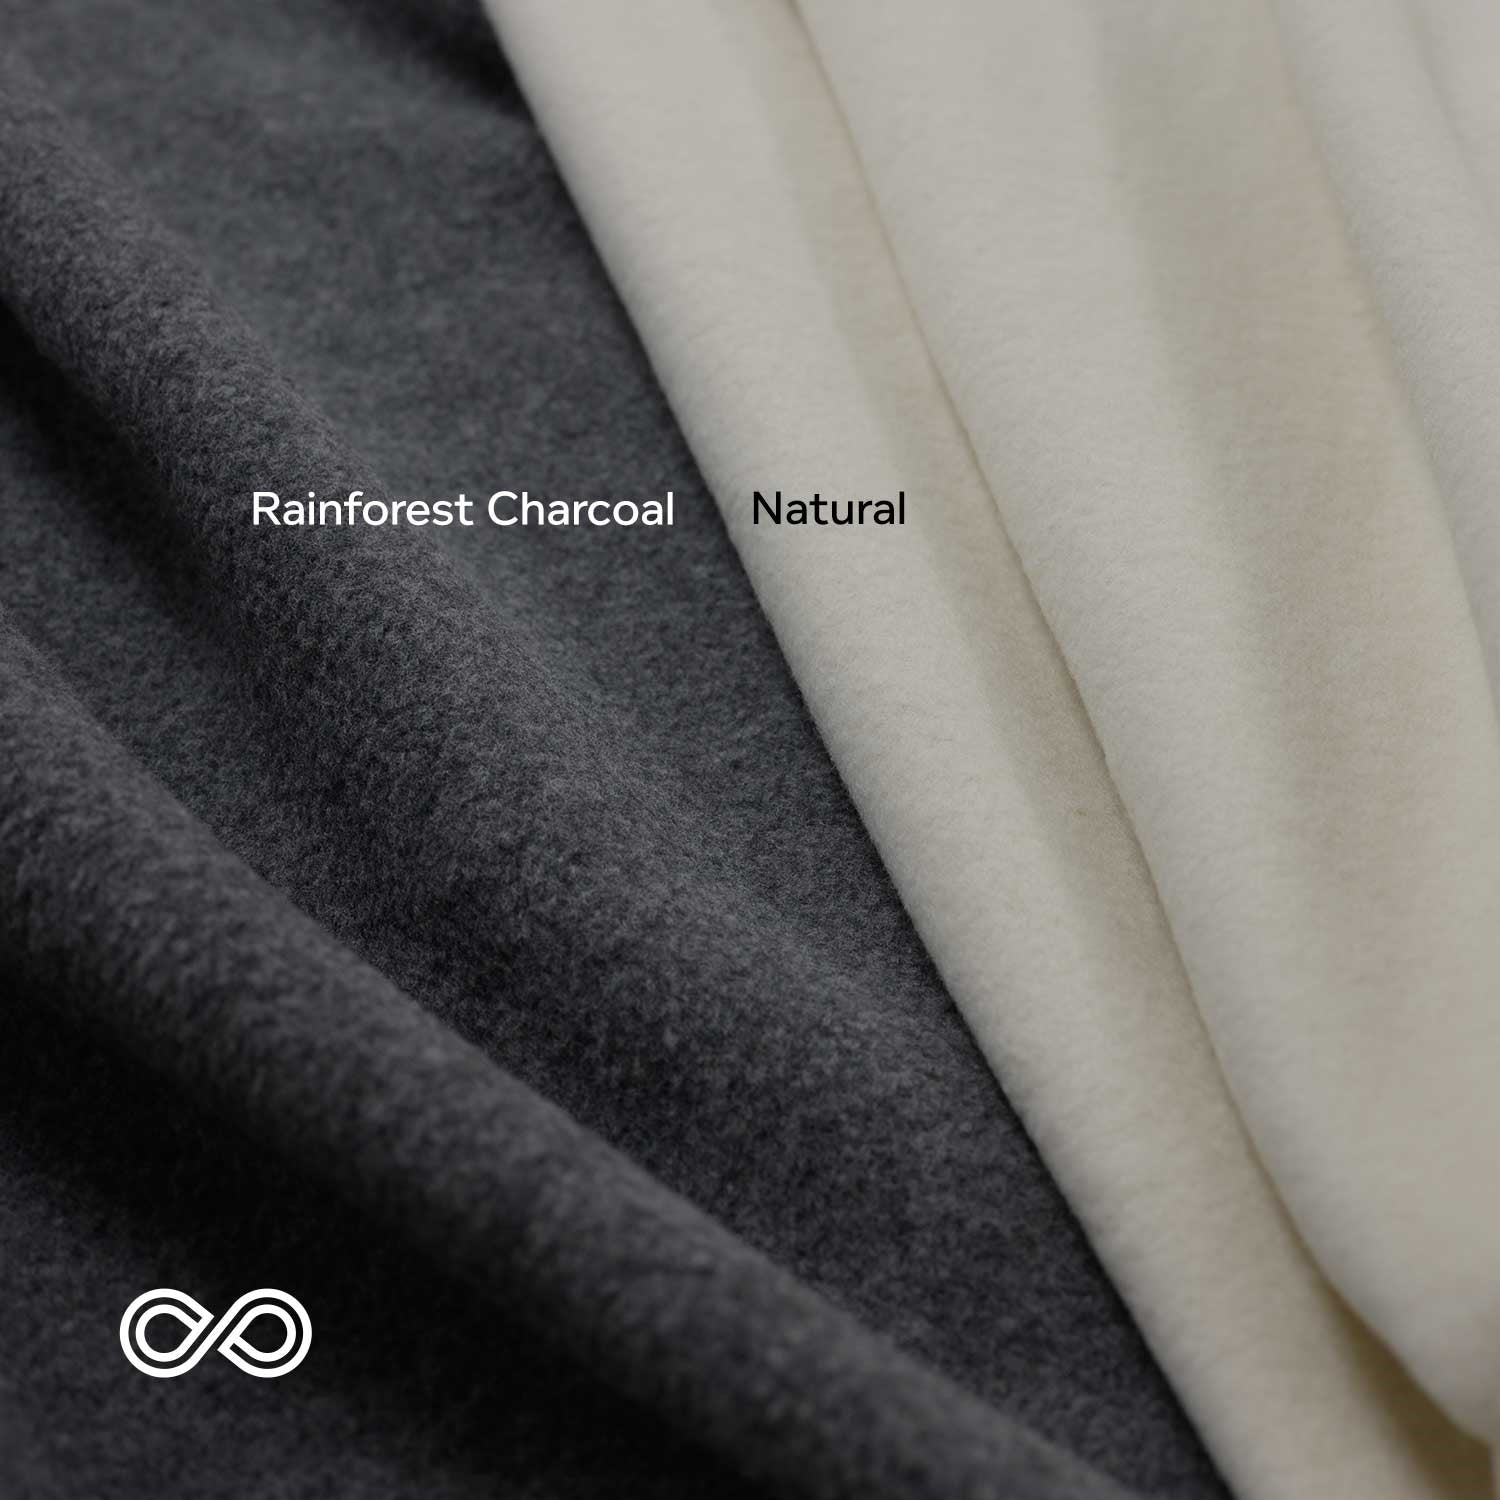 Organic Cotton Fleece Fabric brushed on both sides for softness